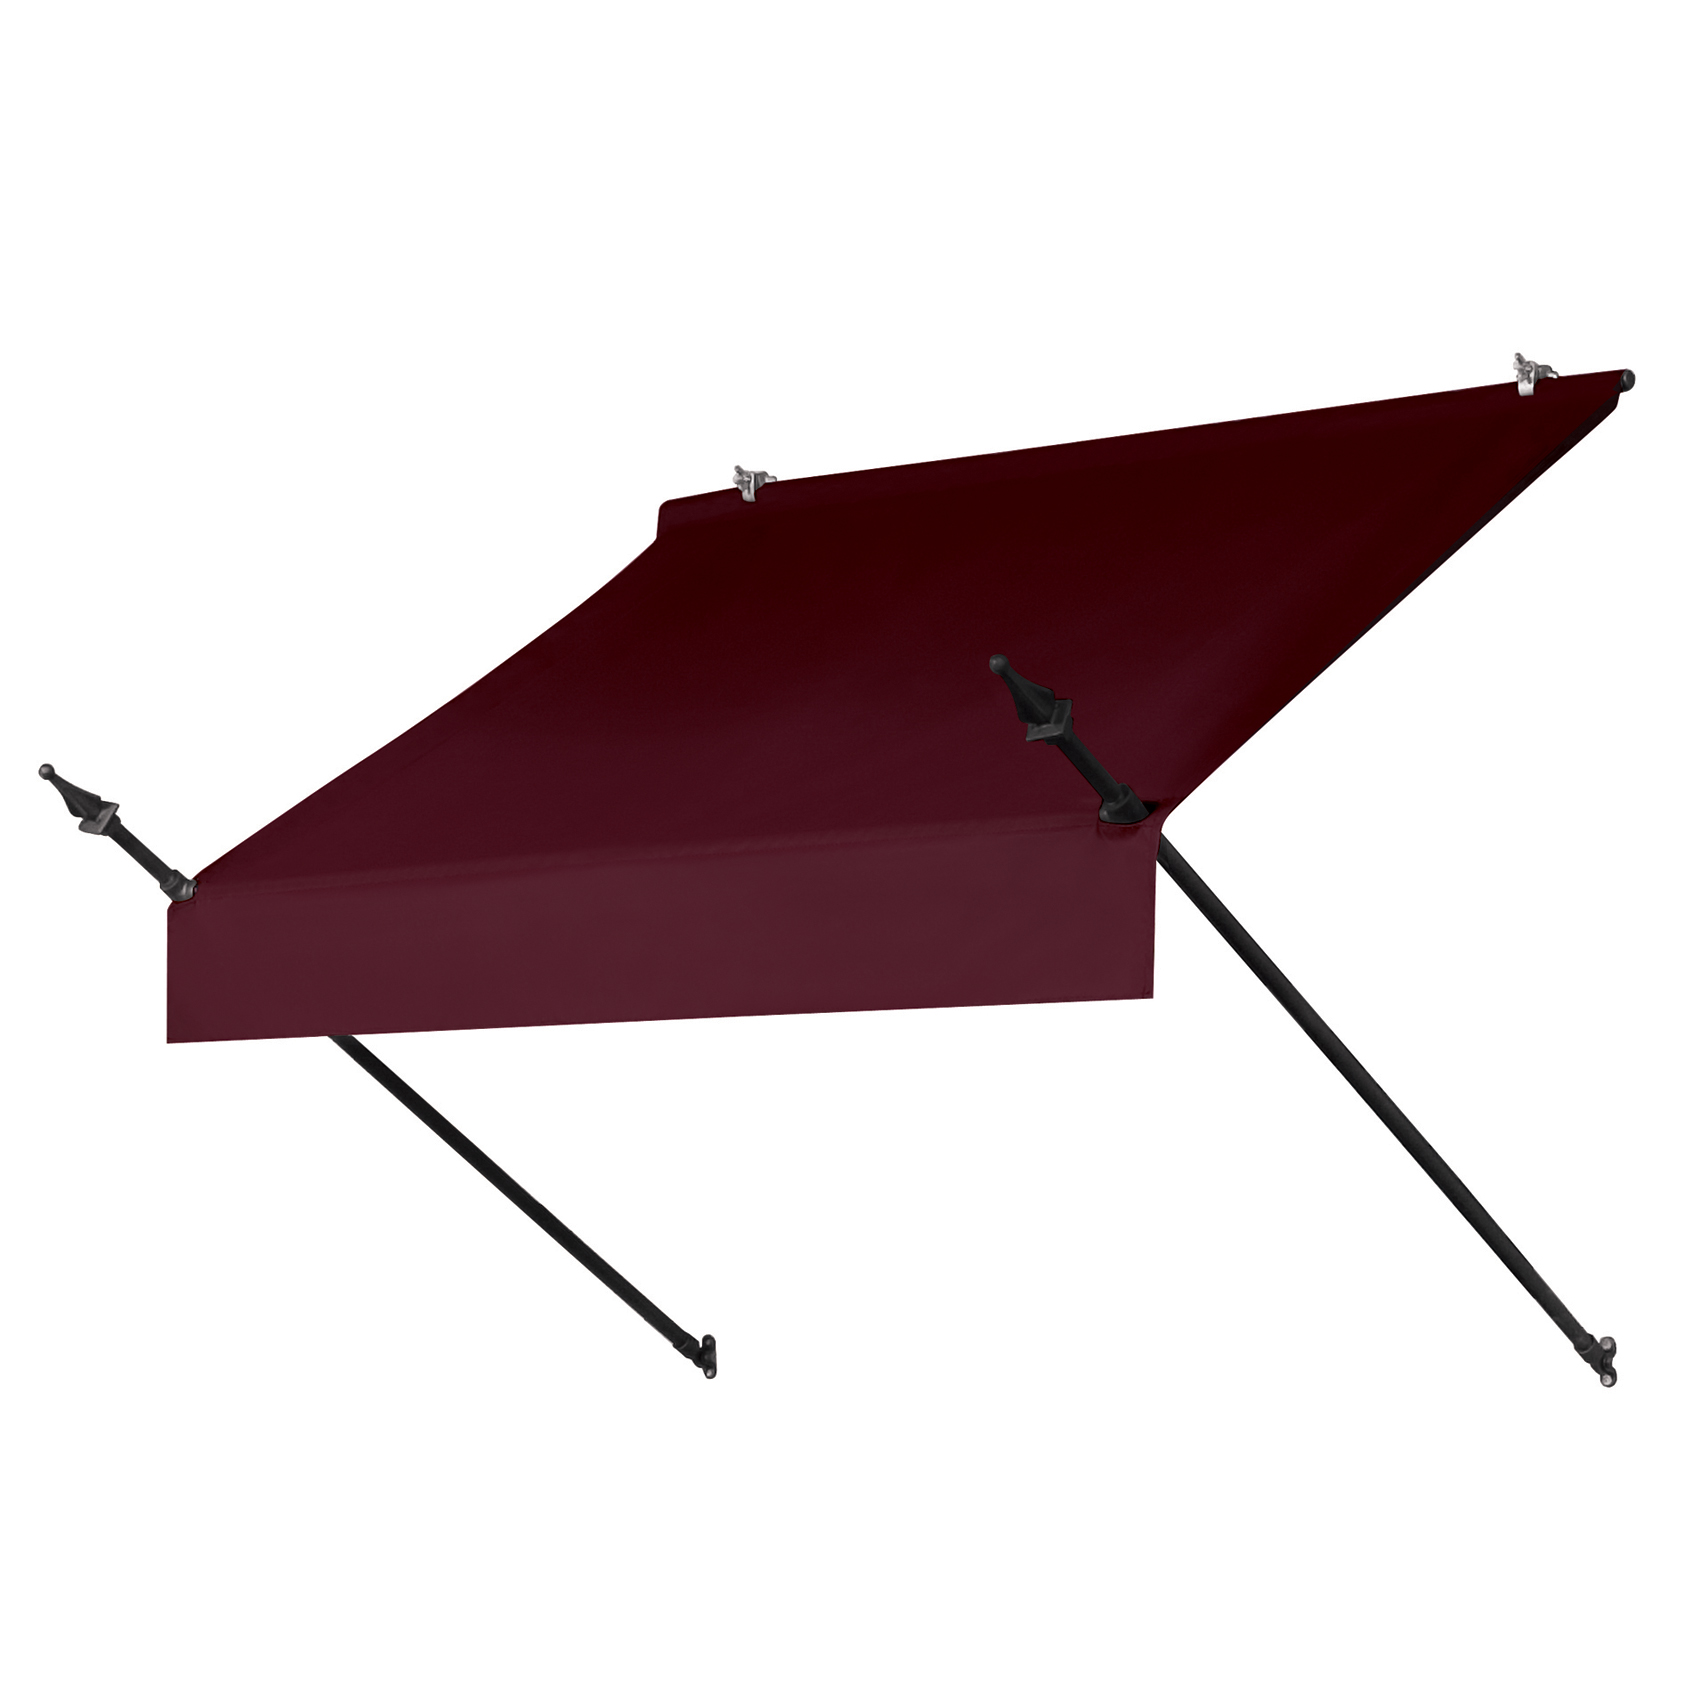 Awnings in a Box&reg; 4' Designer Style Awning in Assorted Colors